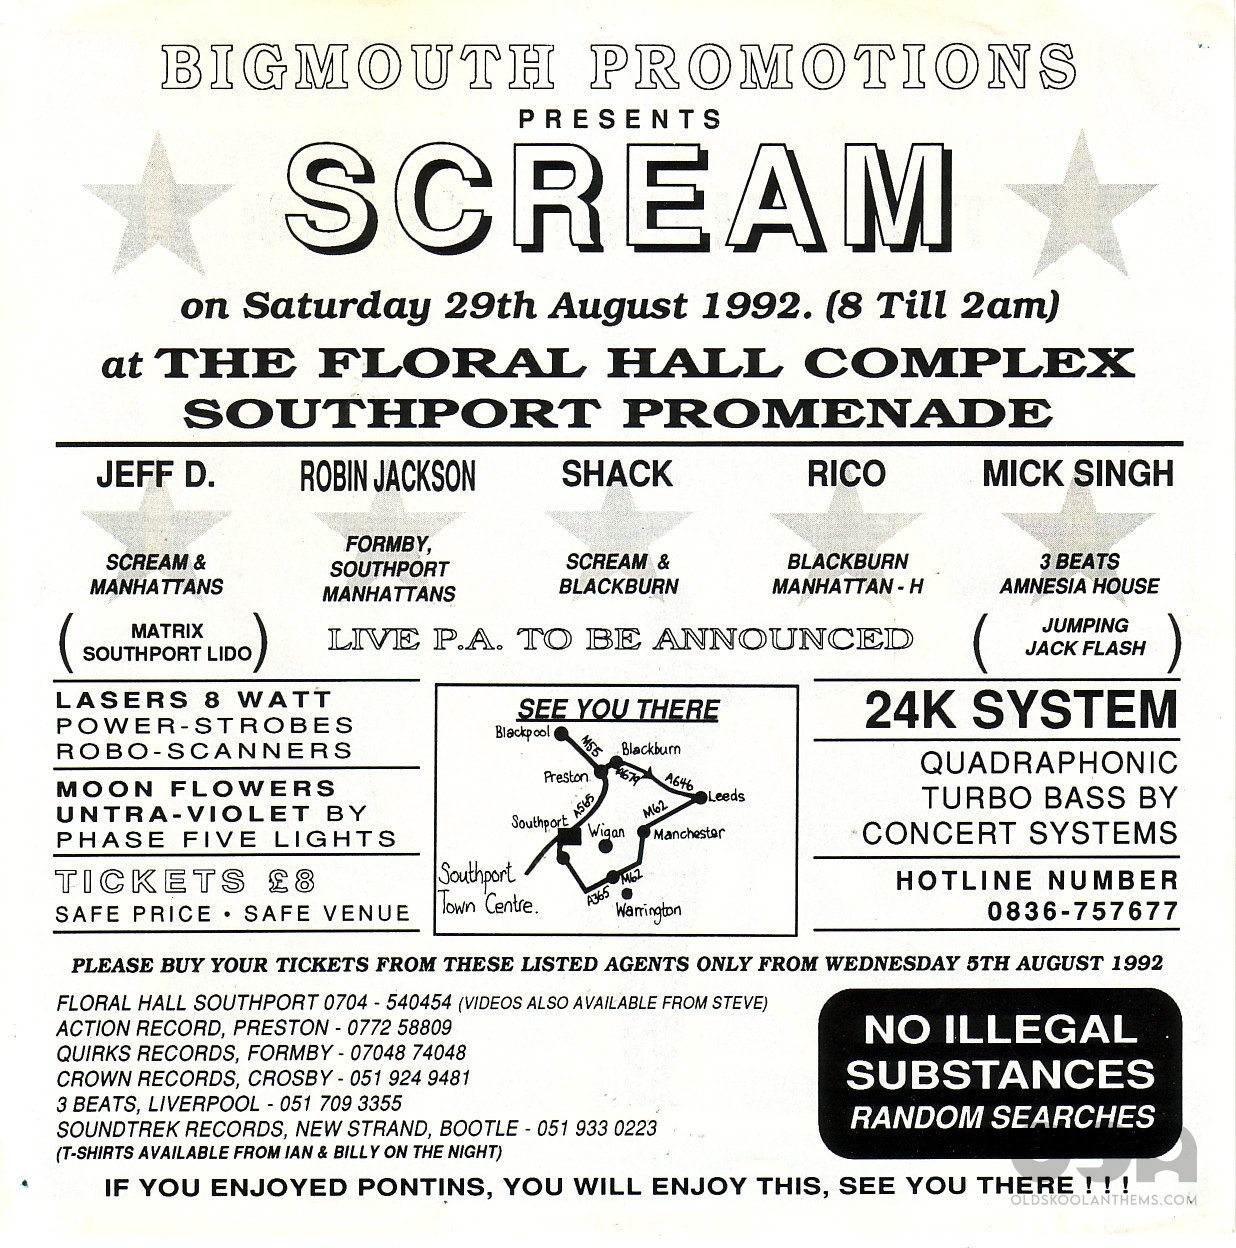 1_Scream_The_Living_Dream___Floral_Hall_Southport_Sat_29th_Aug_1992_rear_view.jpg